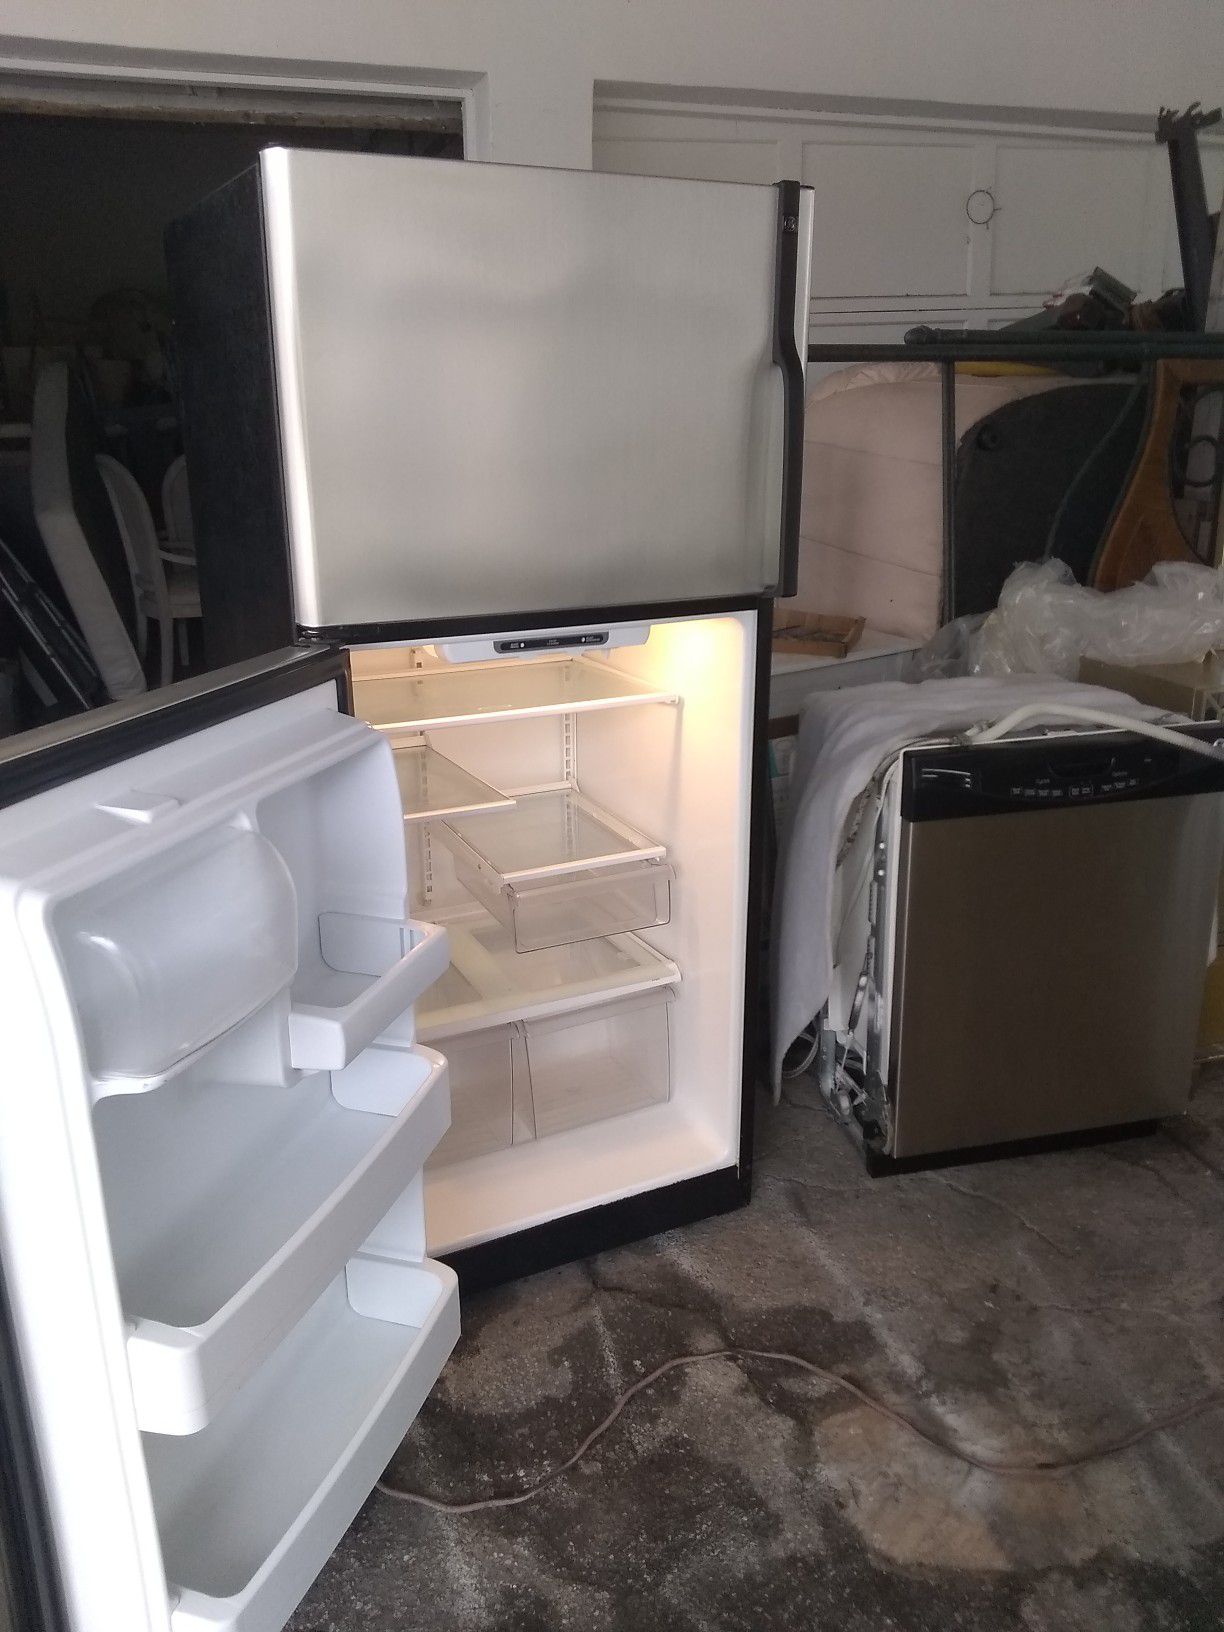 Combo stainless steel Dishwasher Refrigerator and microwave all working perfect condition$450